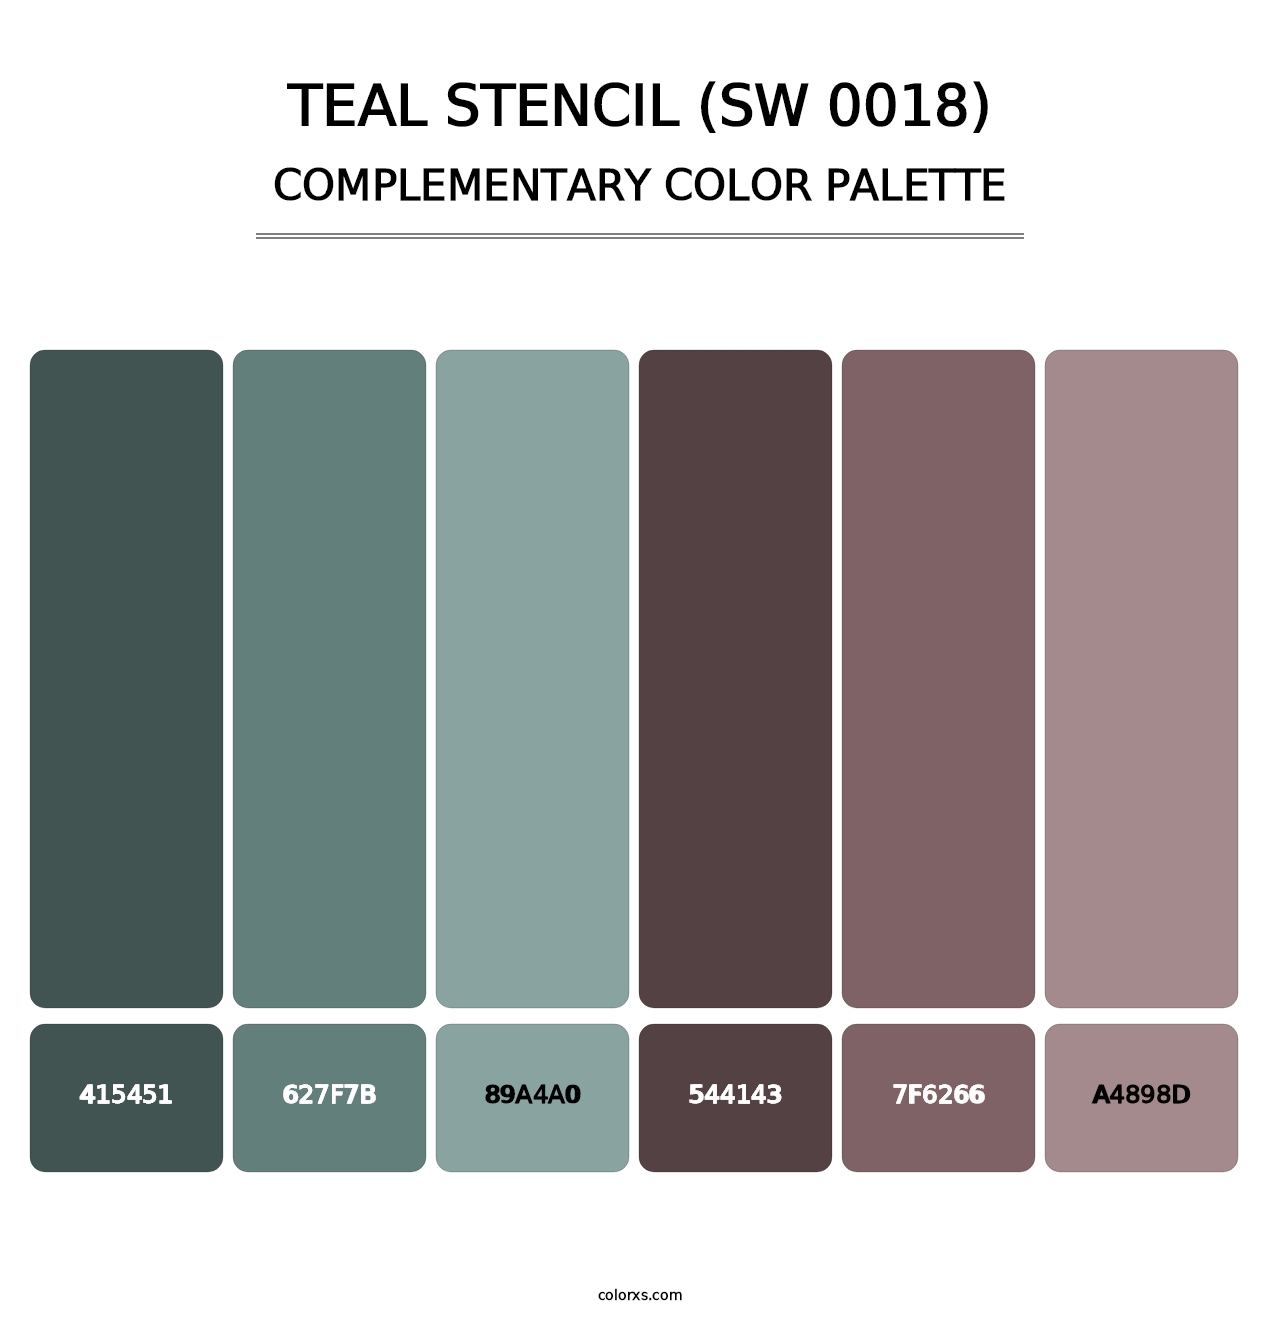 Teal Stencil (SW 0018) - Complementary Color Palette